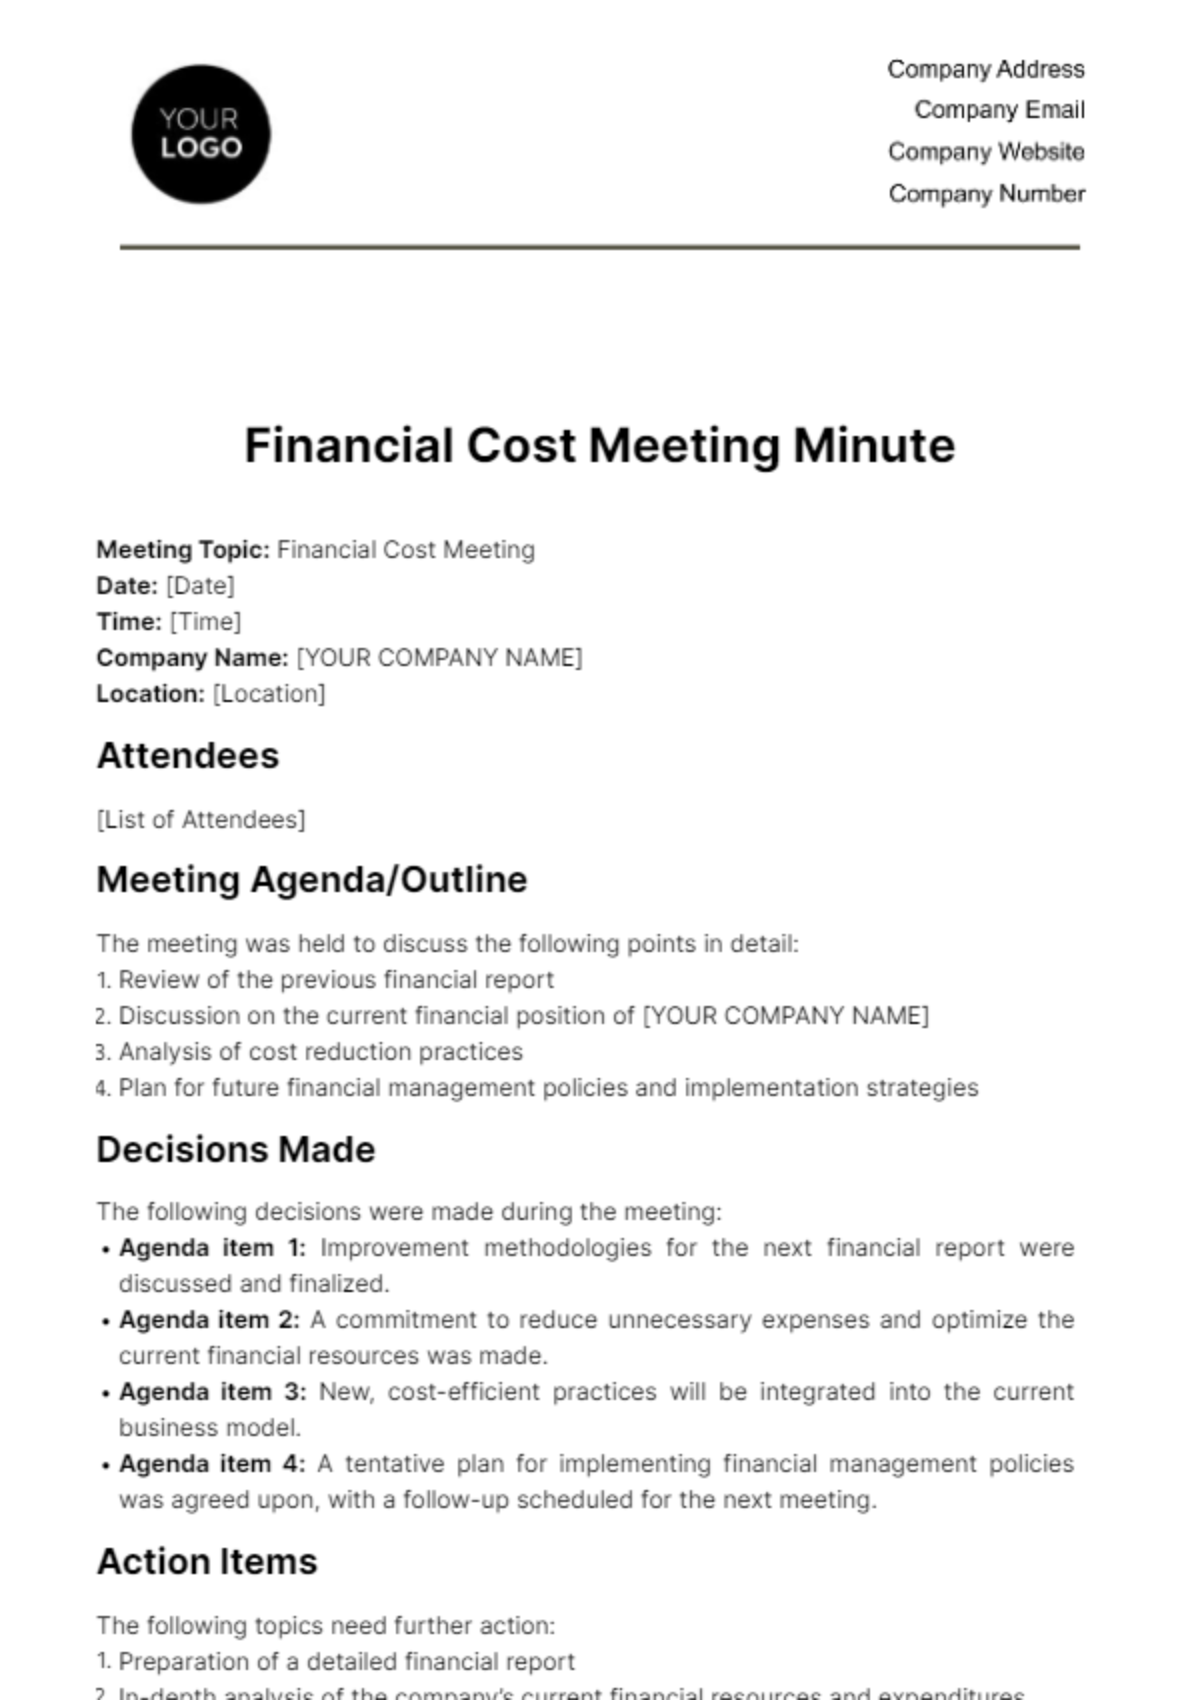 Financial Cost Meeting Minute Template